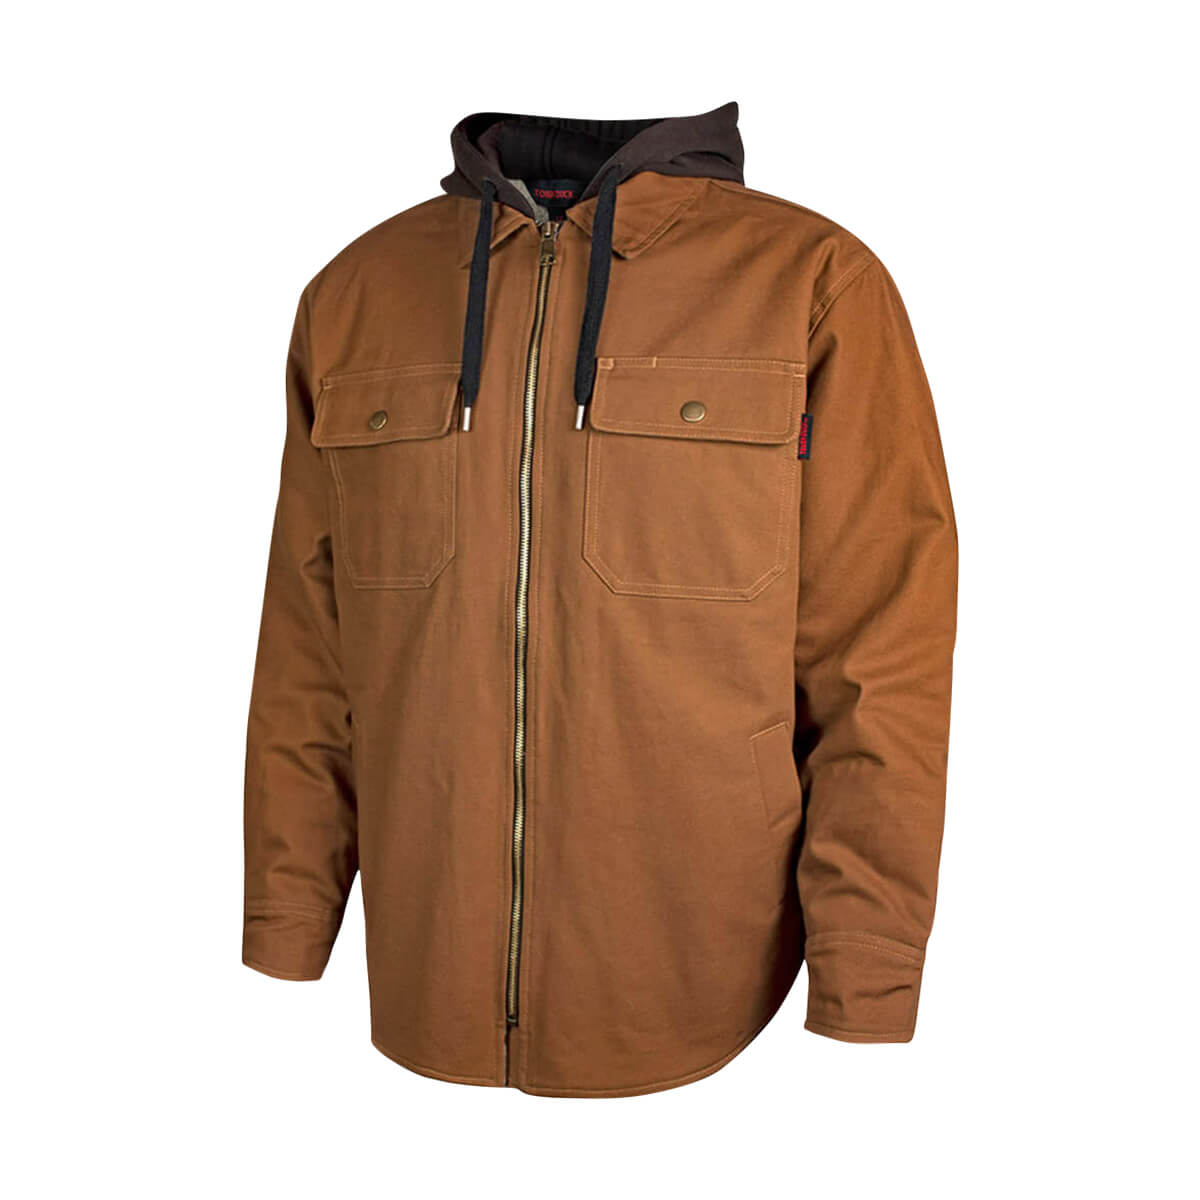 Tough Duck Sherpa Lined Hooded Jacket